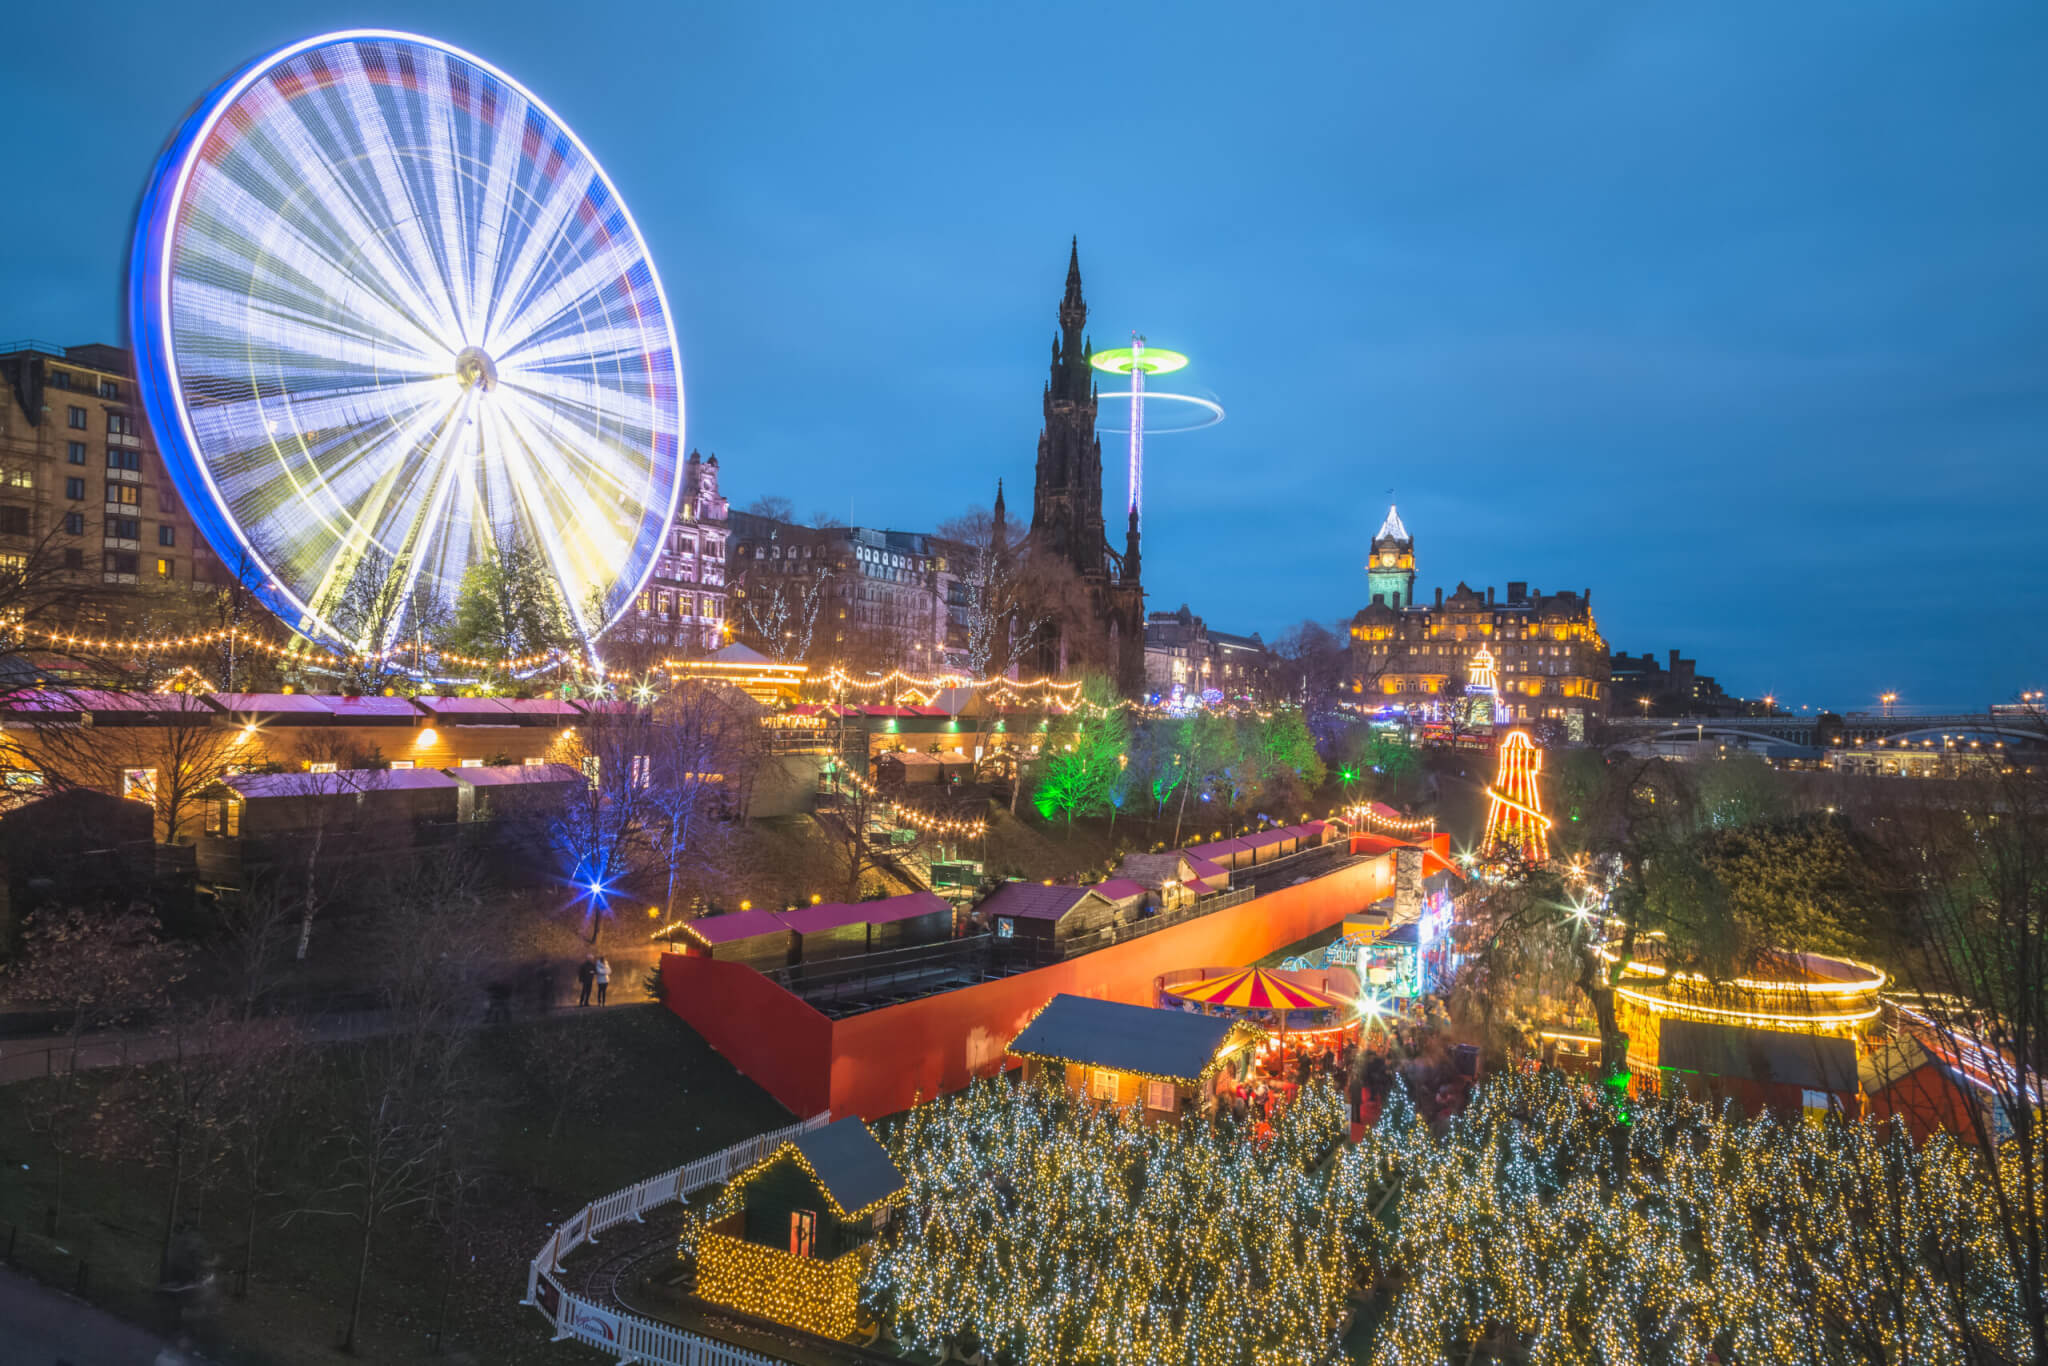 A vibrant and lively view of the Edinburgh Christmas Market at Princes Street Gardens in Scotland at night all lit up and illuminated with Christmas lights.